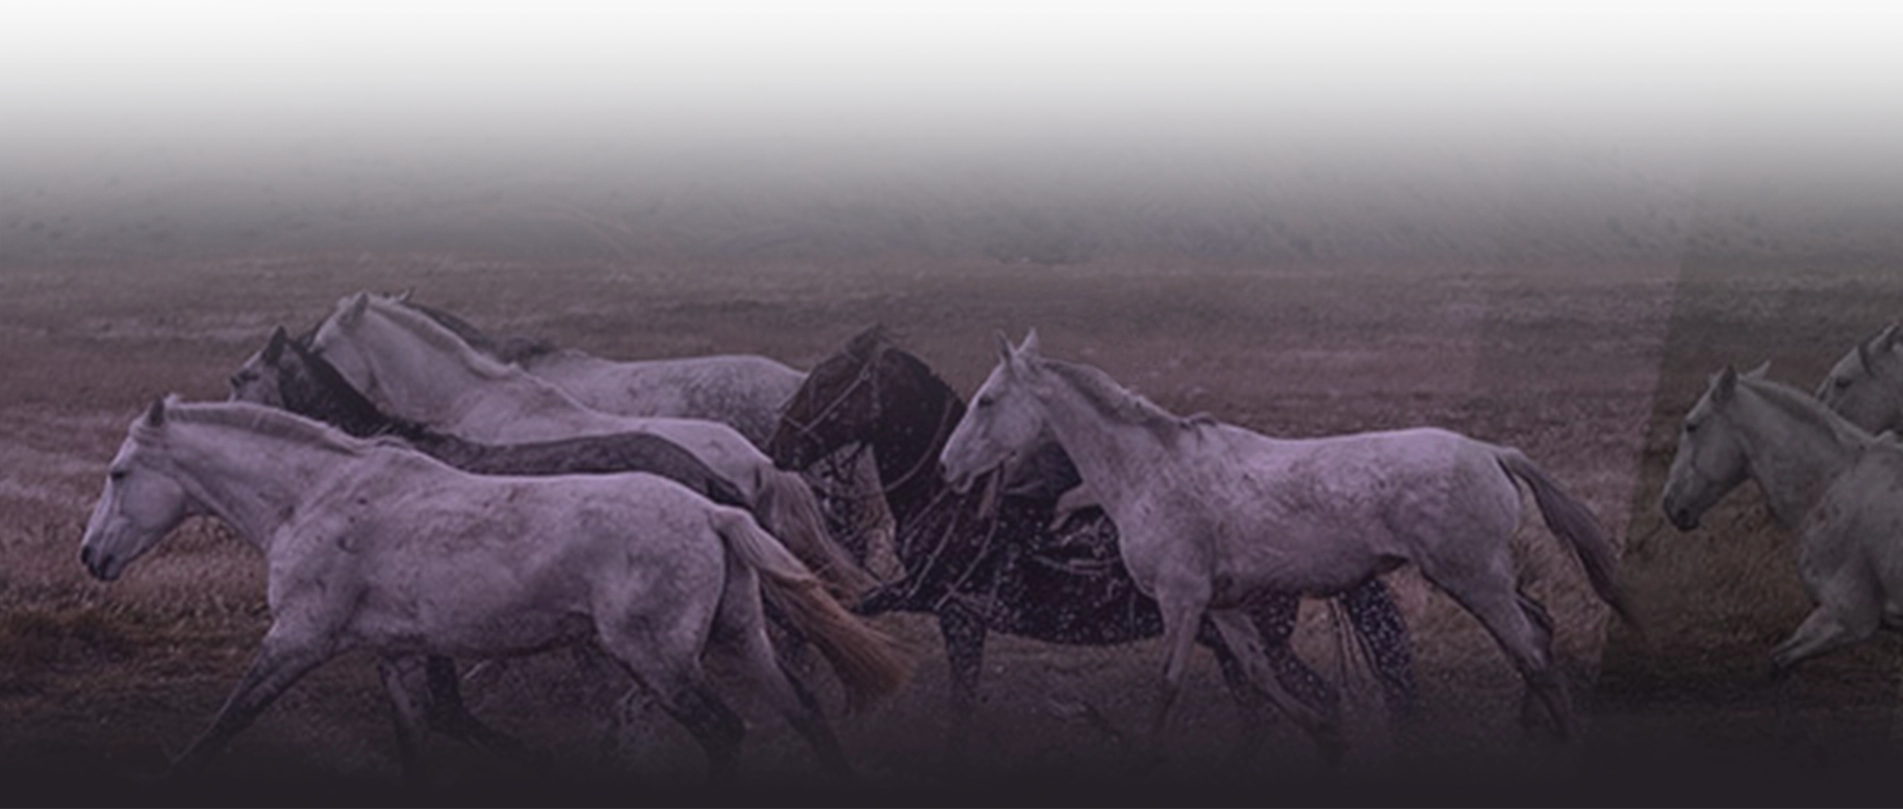 Wild horses running towards the left in a wide open field. There is a purple overlay on top of the image.